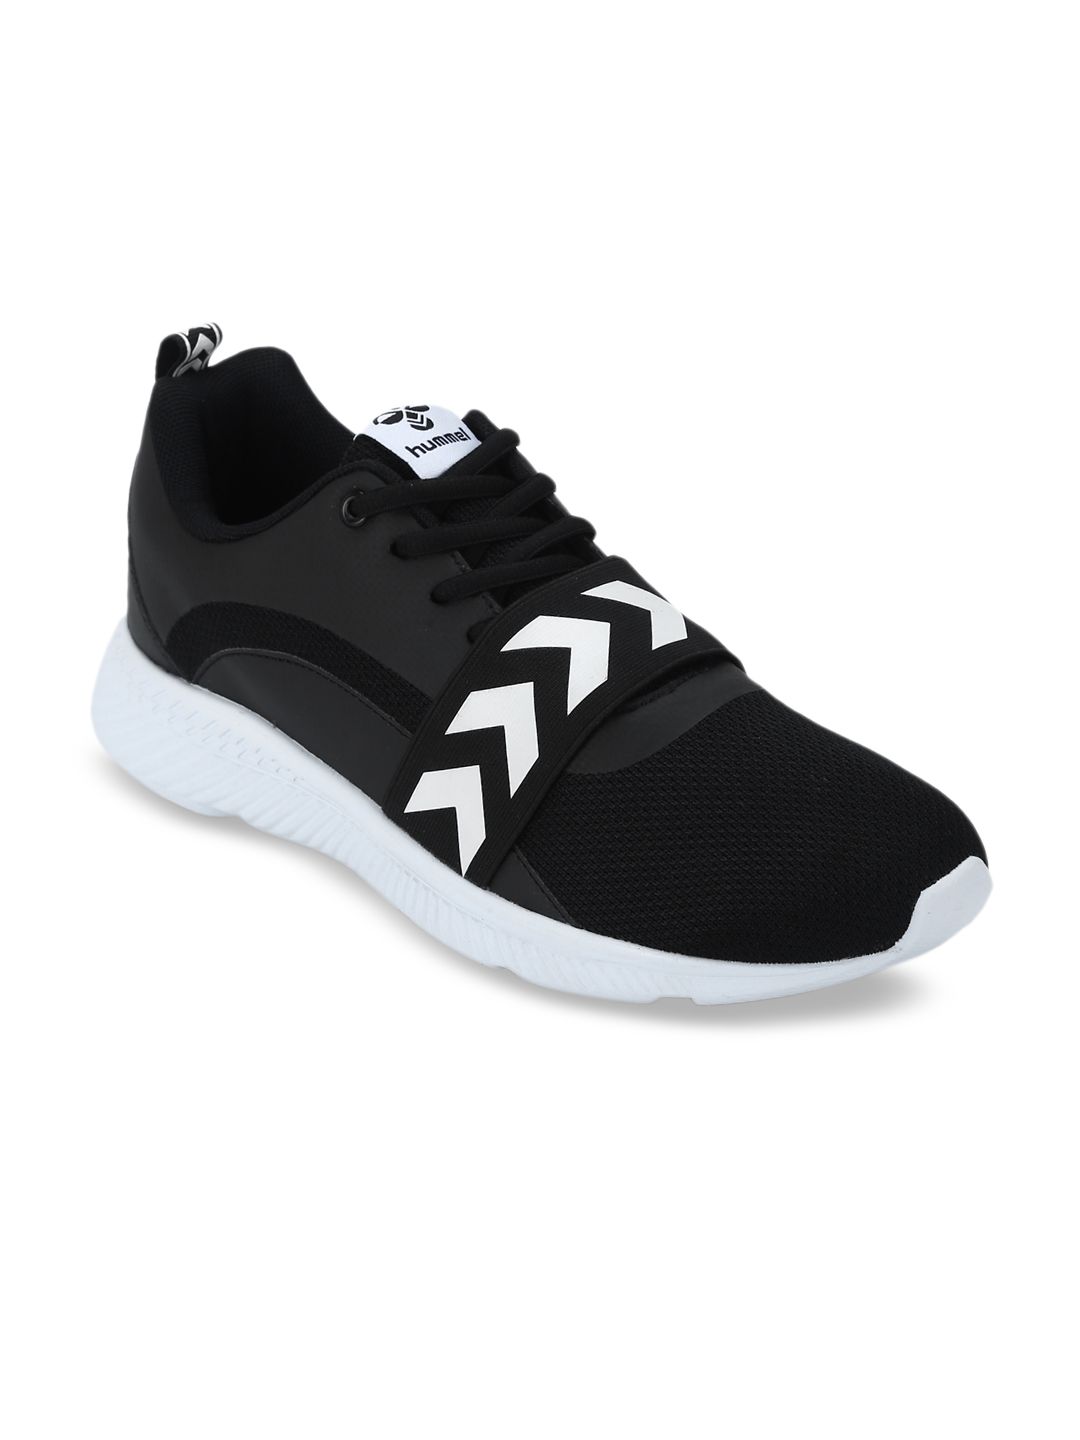 hummel Unisex Black Lutz Sports Shoes Price in India